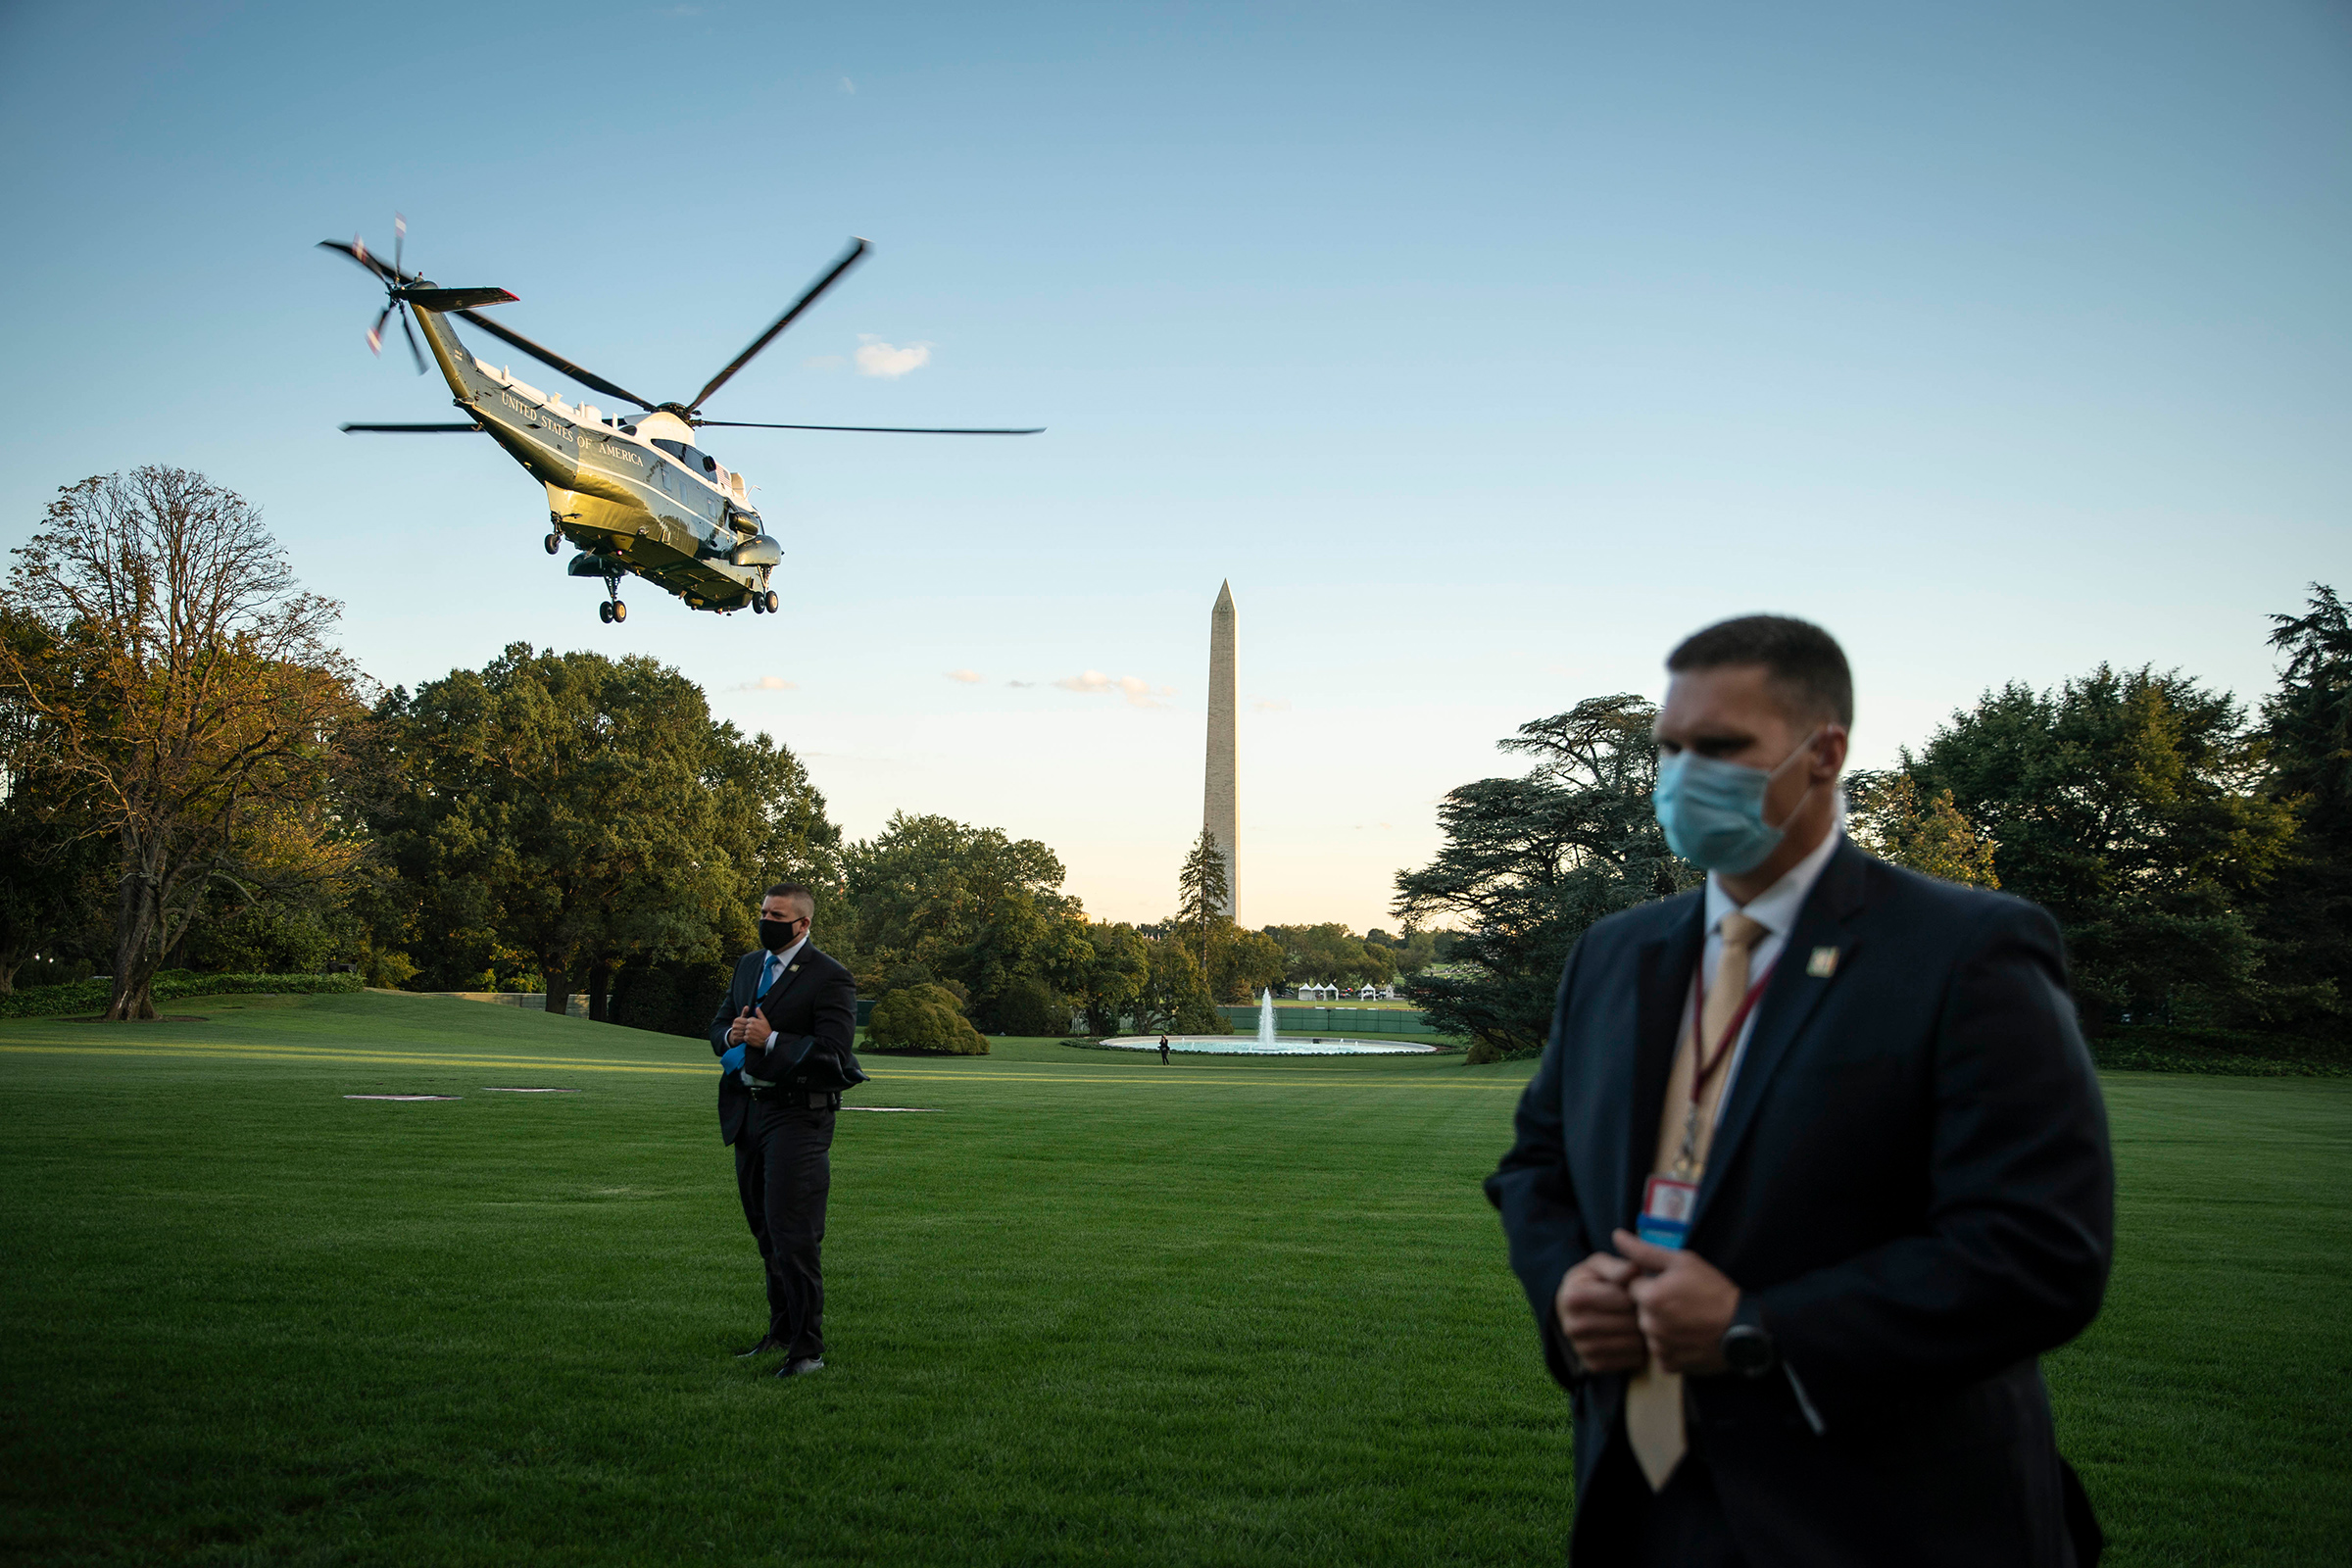 Secret Service agents wearing protective face masks stand by as Marine One, carrying President Trump, departs from the South Lawn of the White House on Oct. 2, 2020.